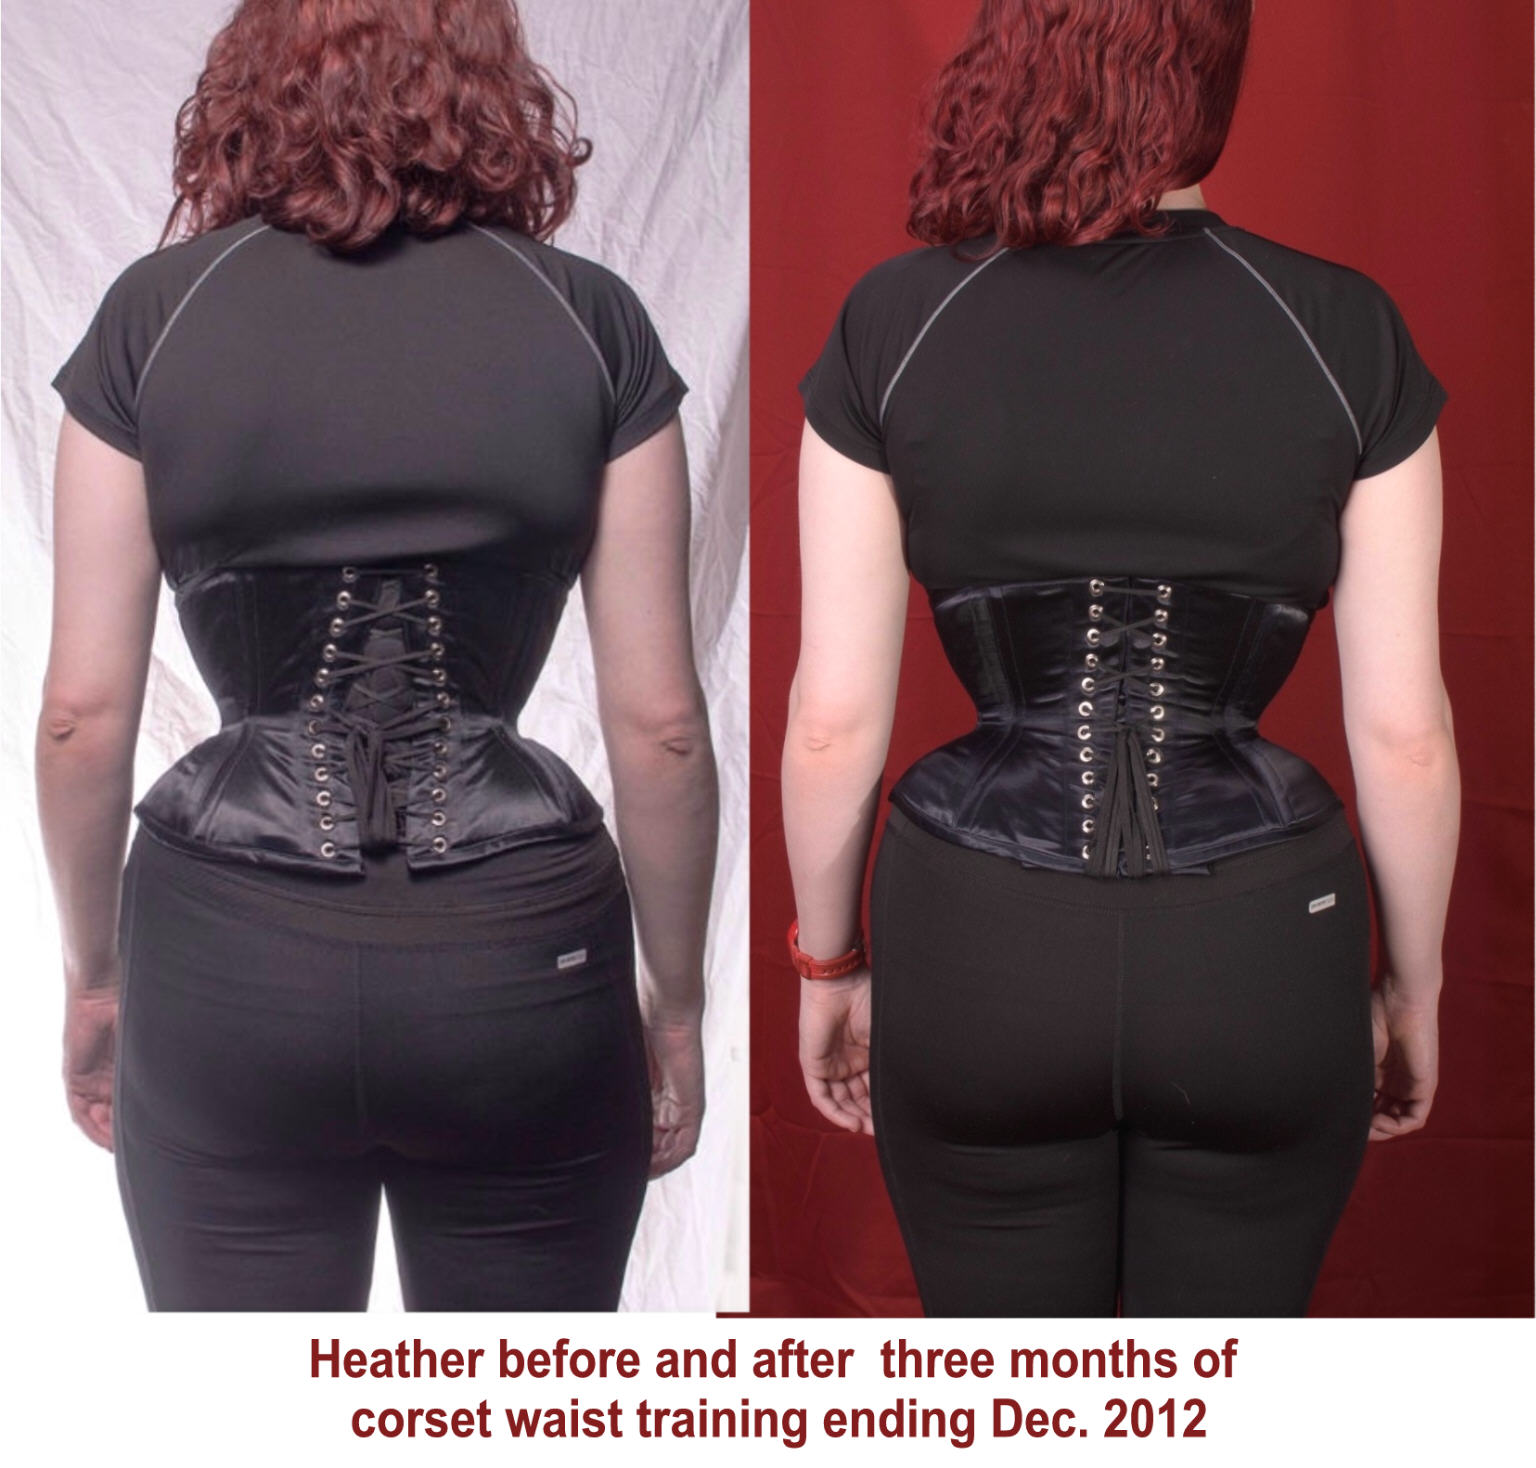 https://romantasycustomcorsetry.files.wordpress.com/2013/10/heather-uncorseted-back-view-after-training-end-dec-2012.jpg